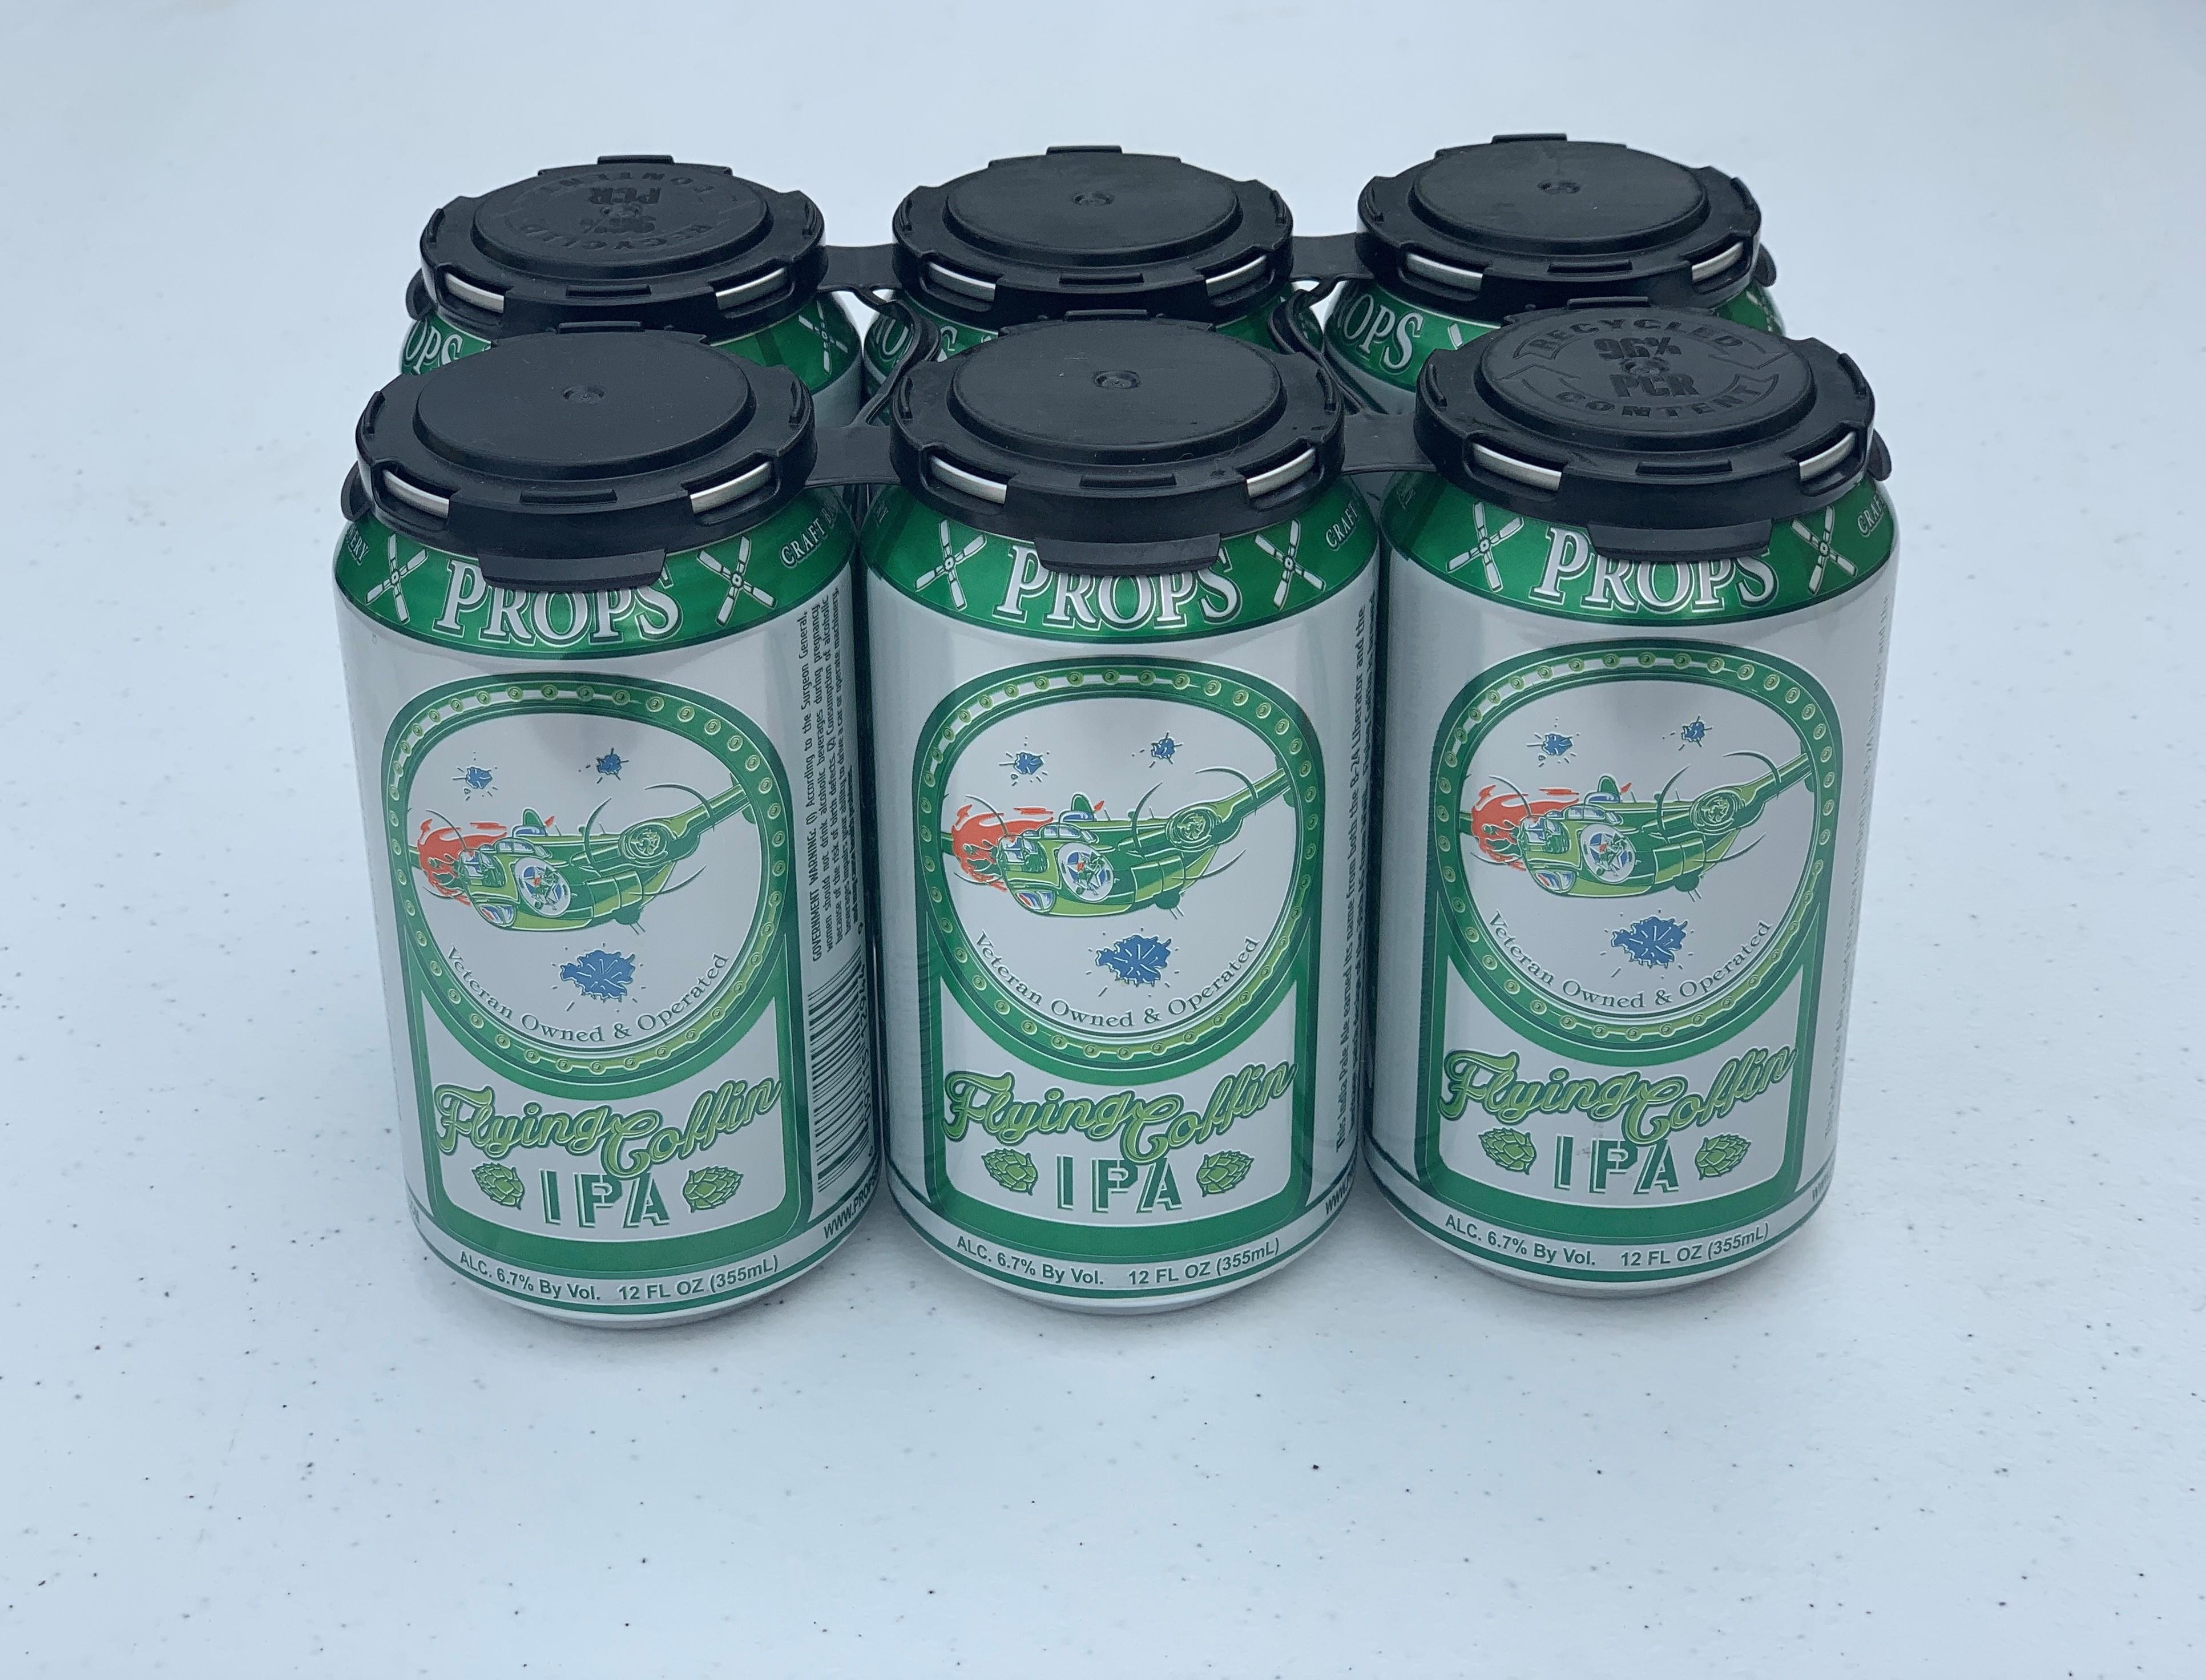 Props Flying Coffin Ipa 6pk can